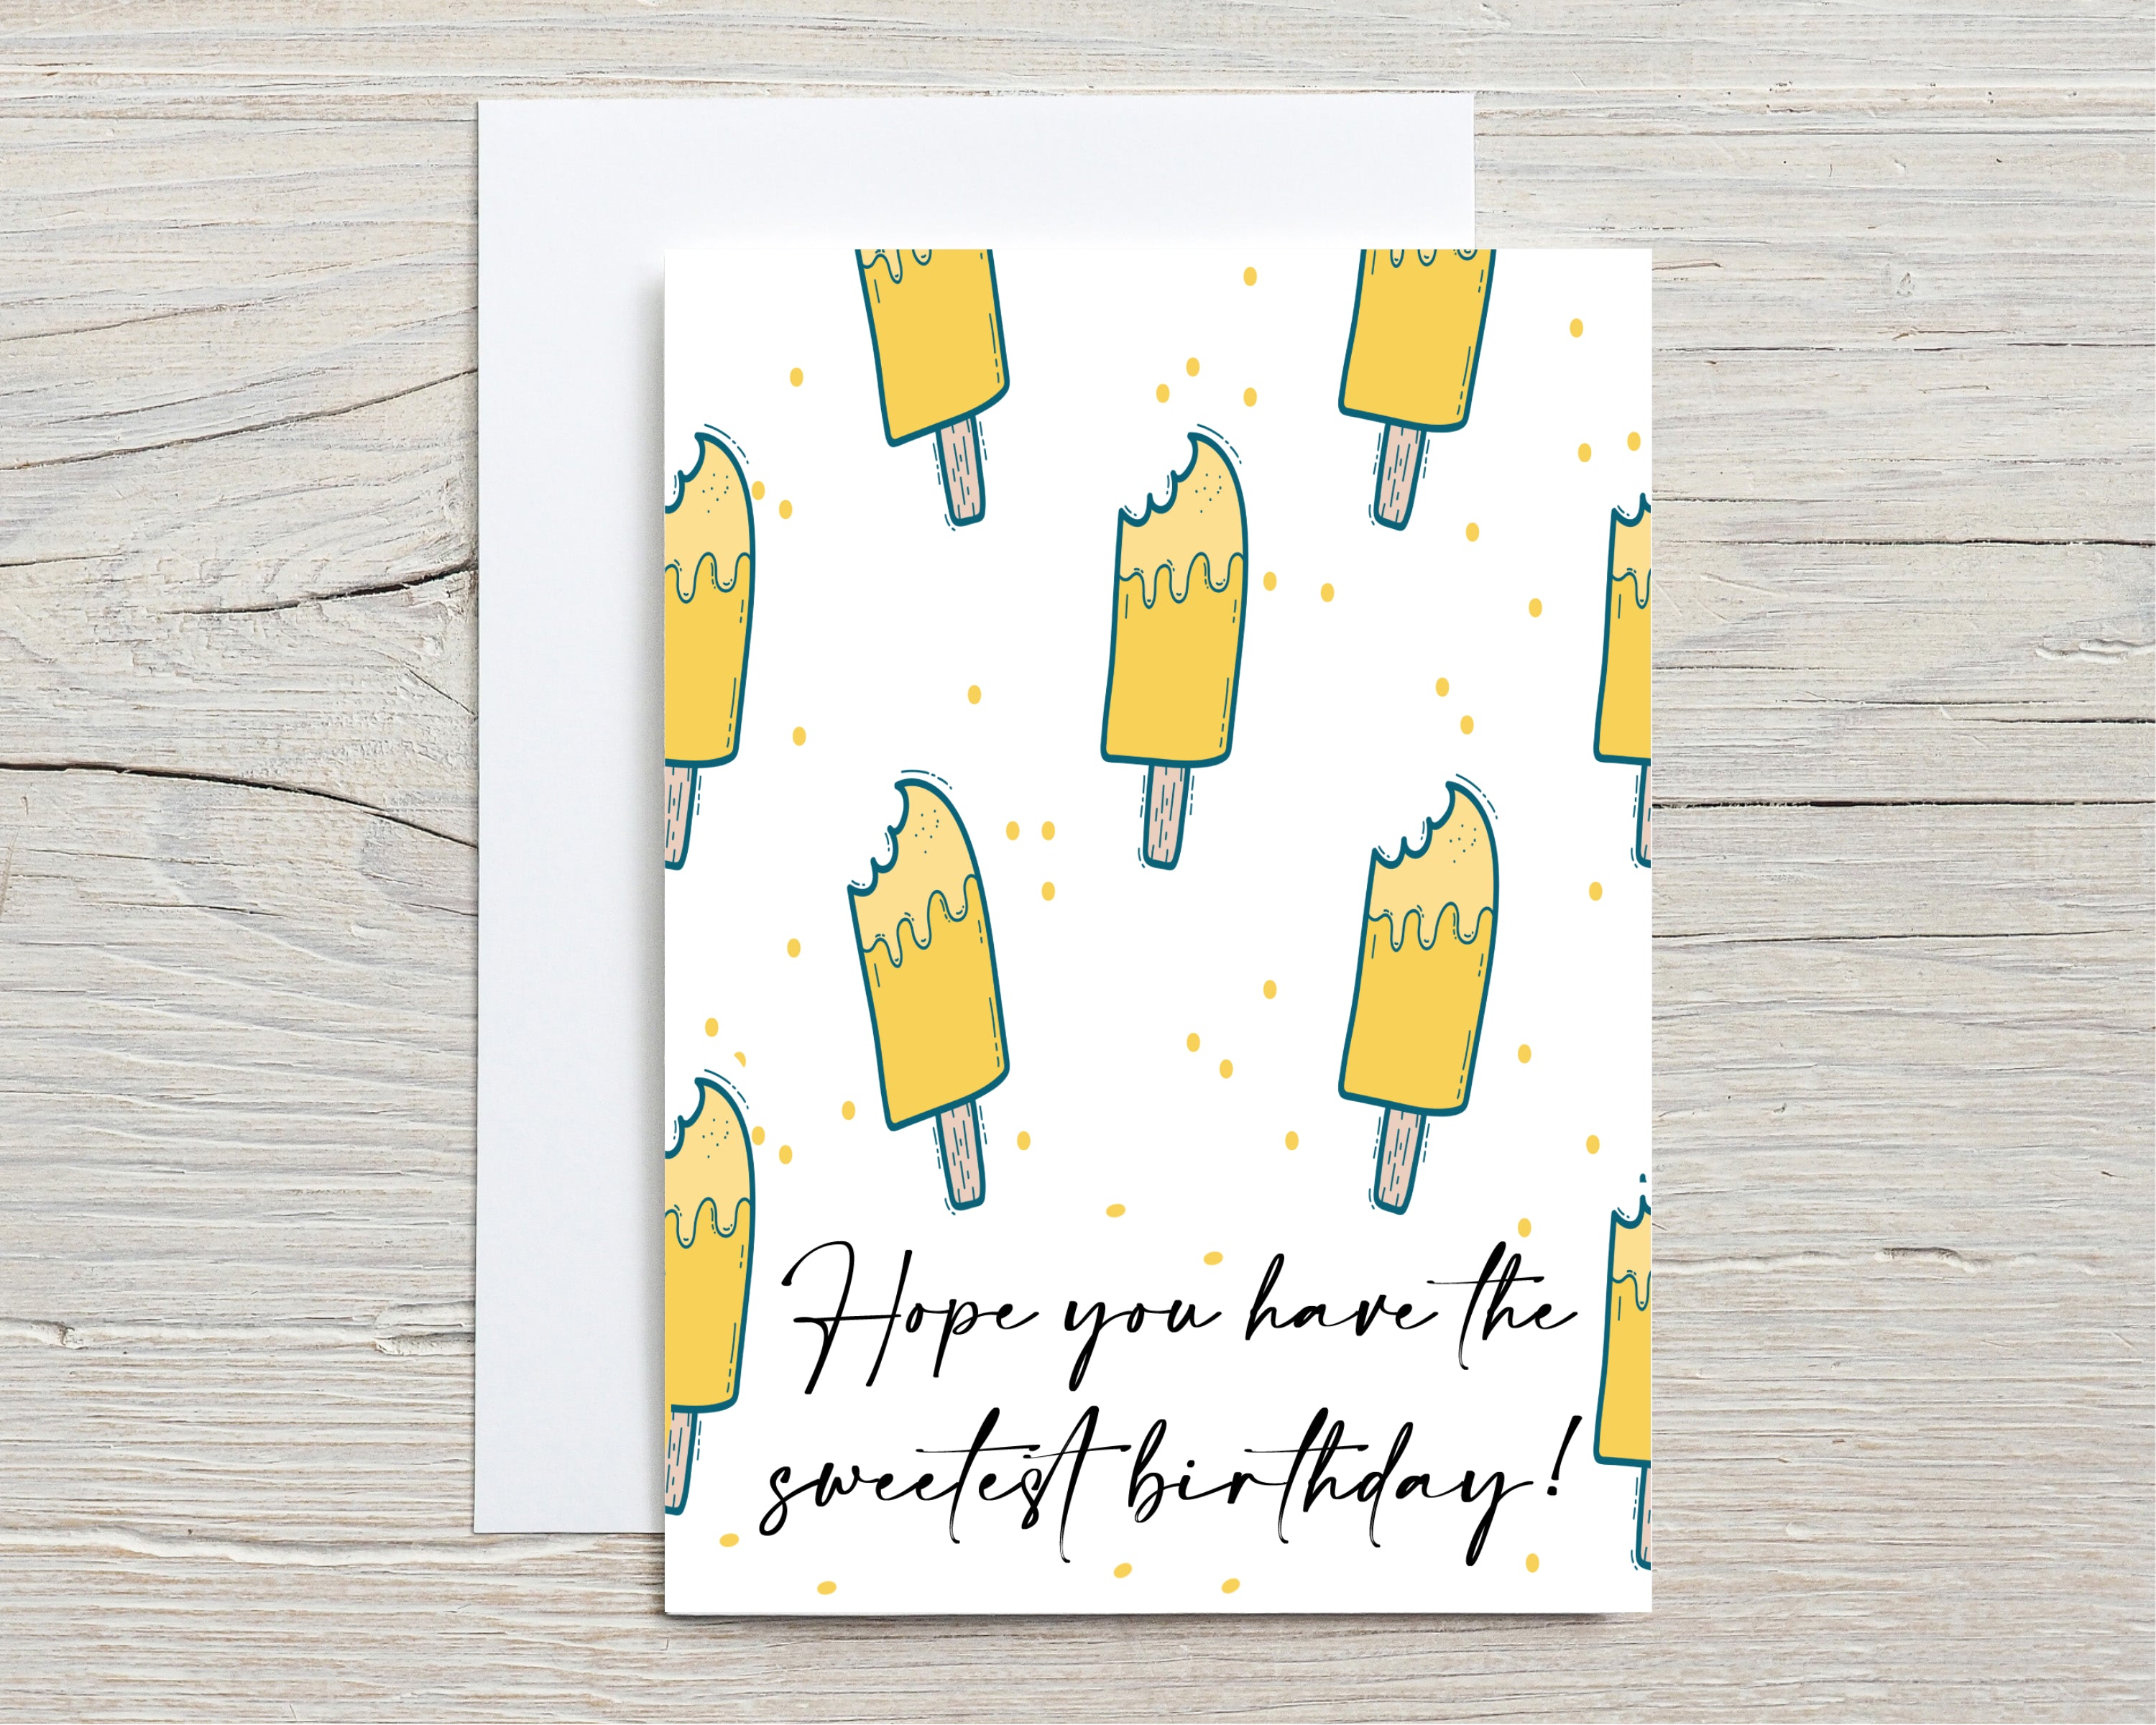 Have The Sweetest Birthday! - Greeting Card